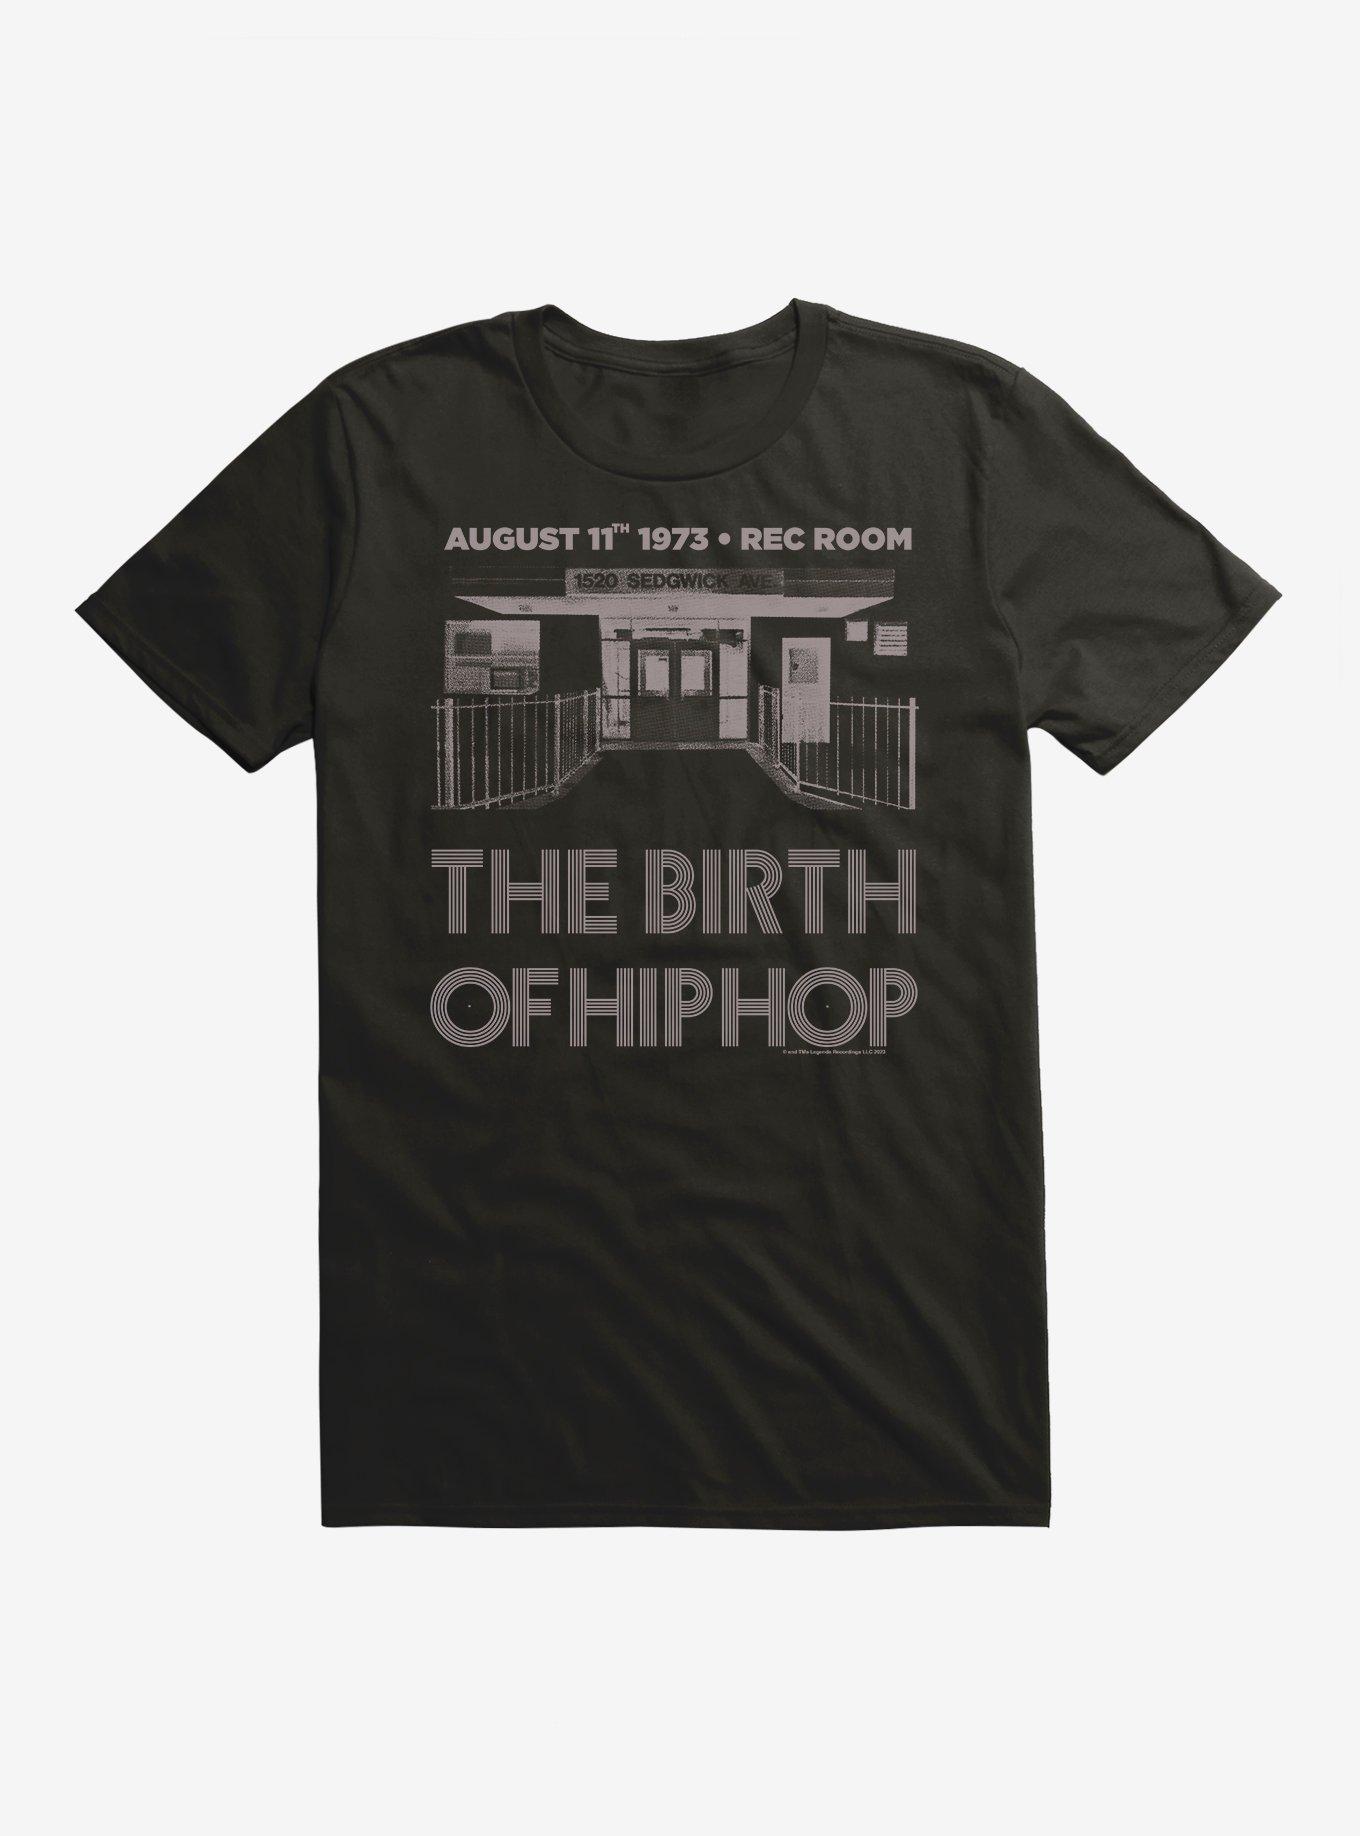 The 50th Anniversary Of Hip-Hop The Birth Of Hip-Hop T-Shirt | Hot